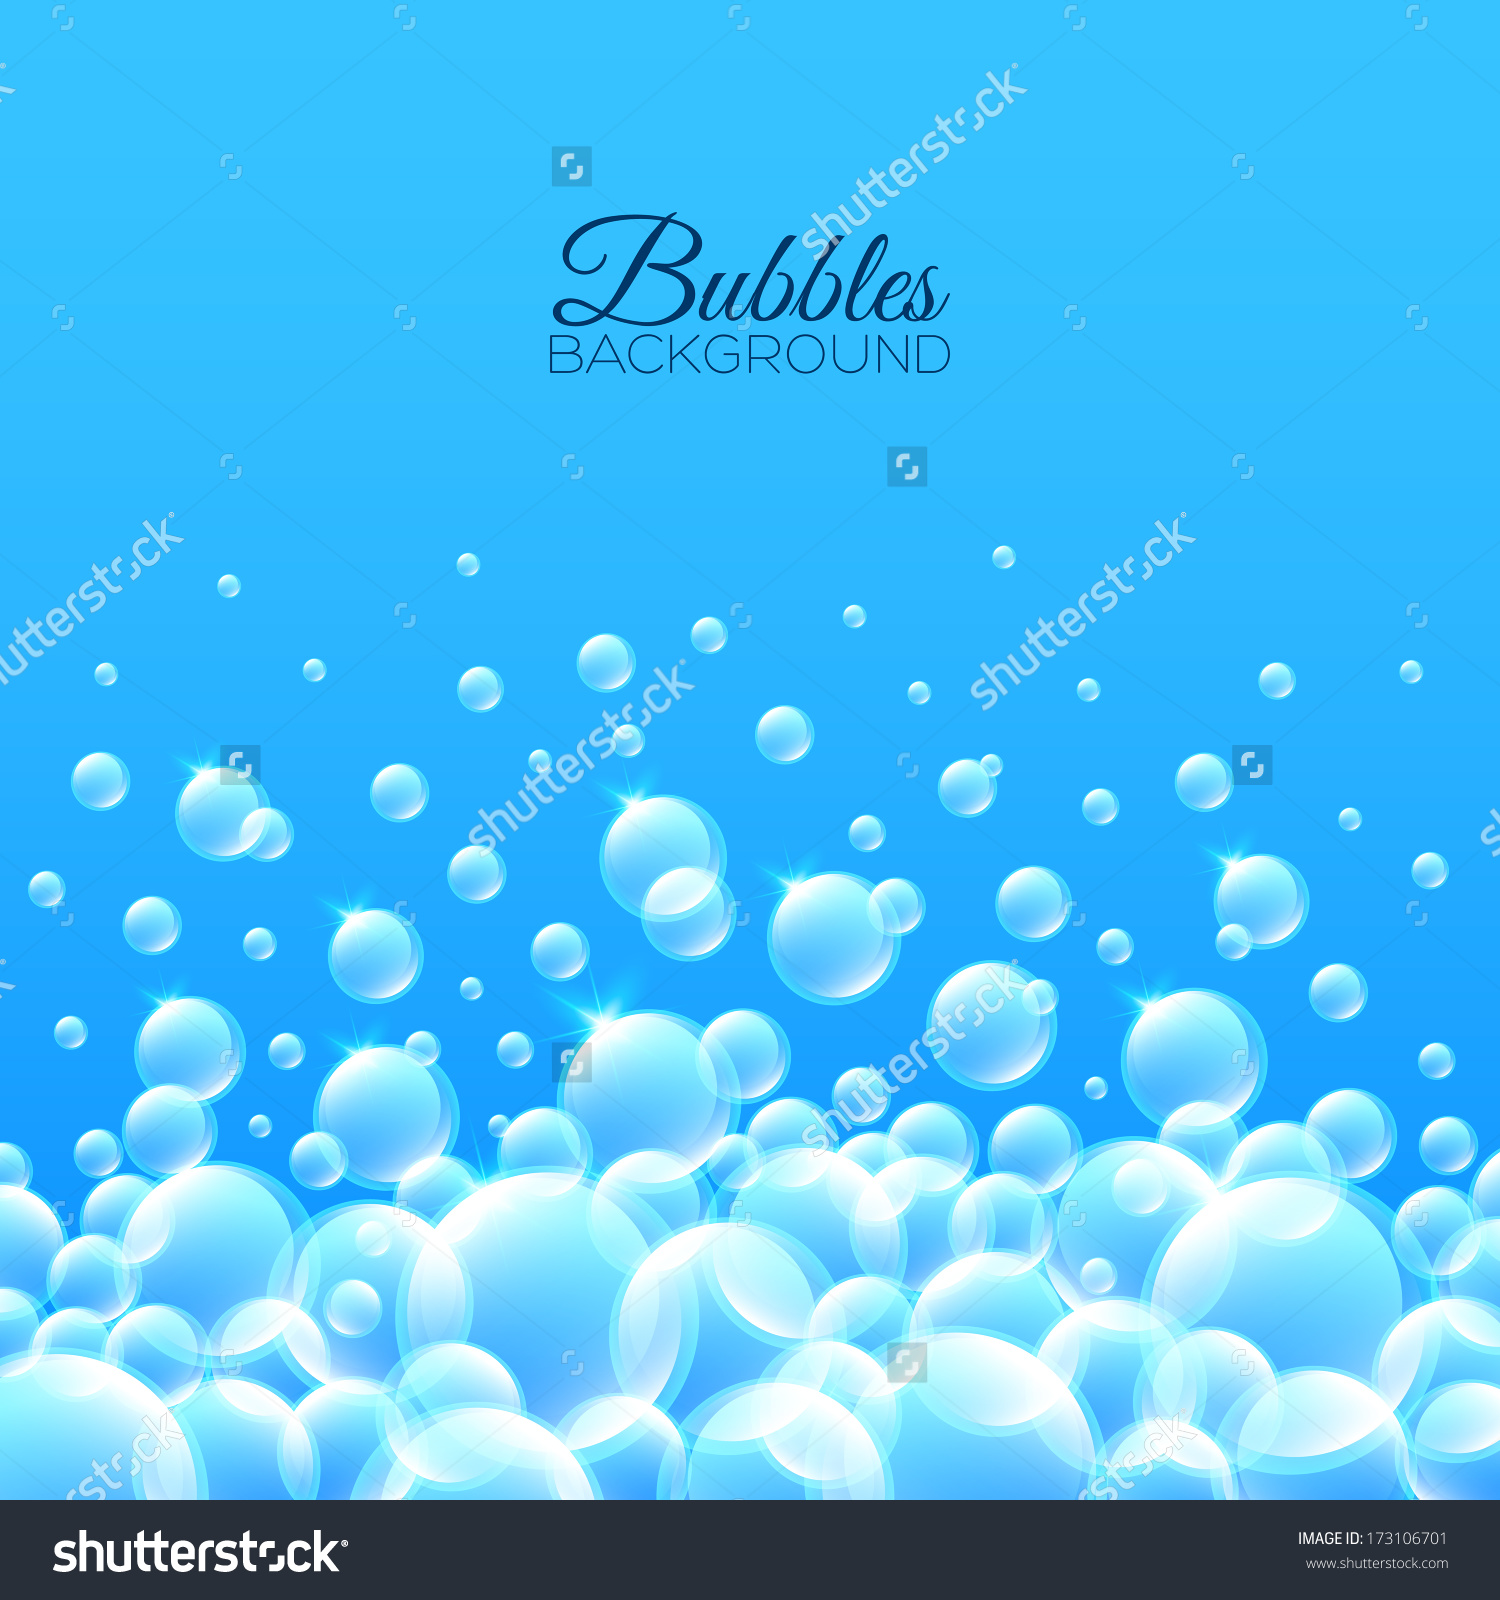 Floating Bubbles Beautiful Vector Background For Your Design